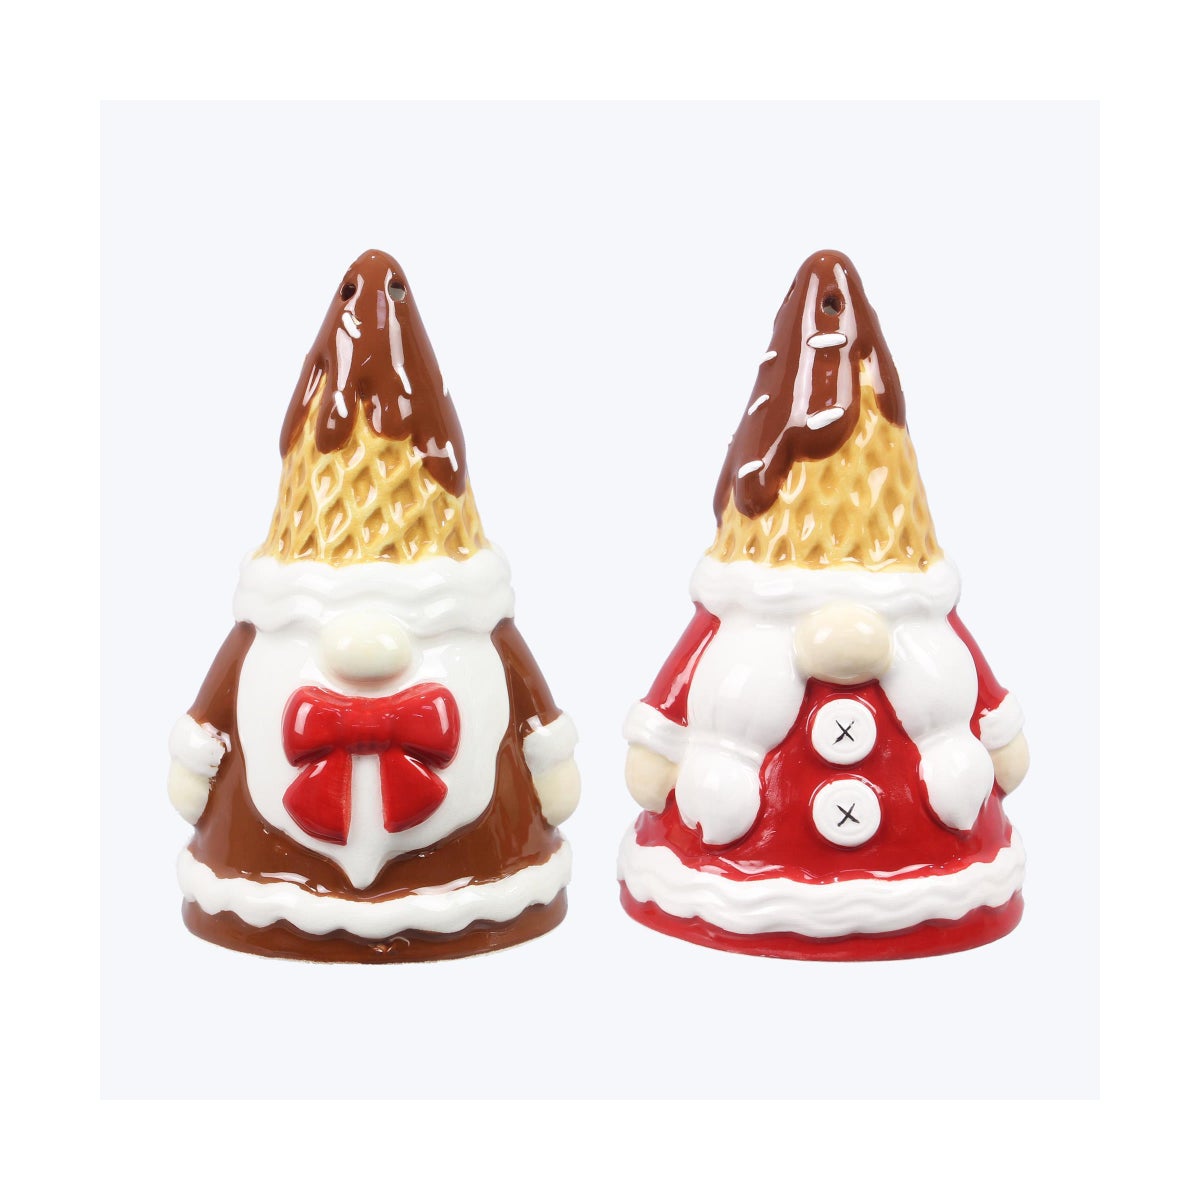 Ceramic Cocoa and Cookie Gnome Salt and Pepper Set of 2. S/P